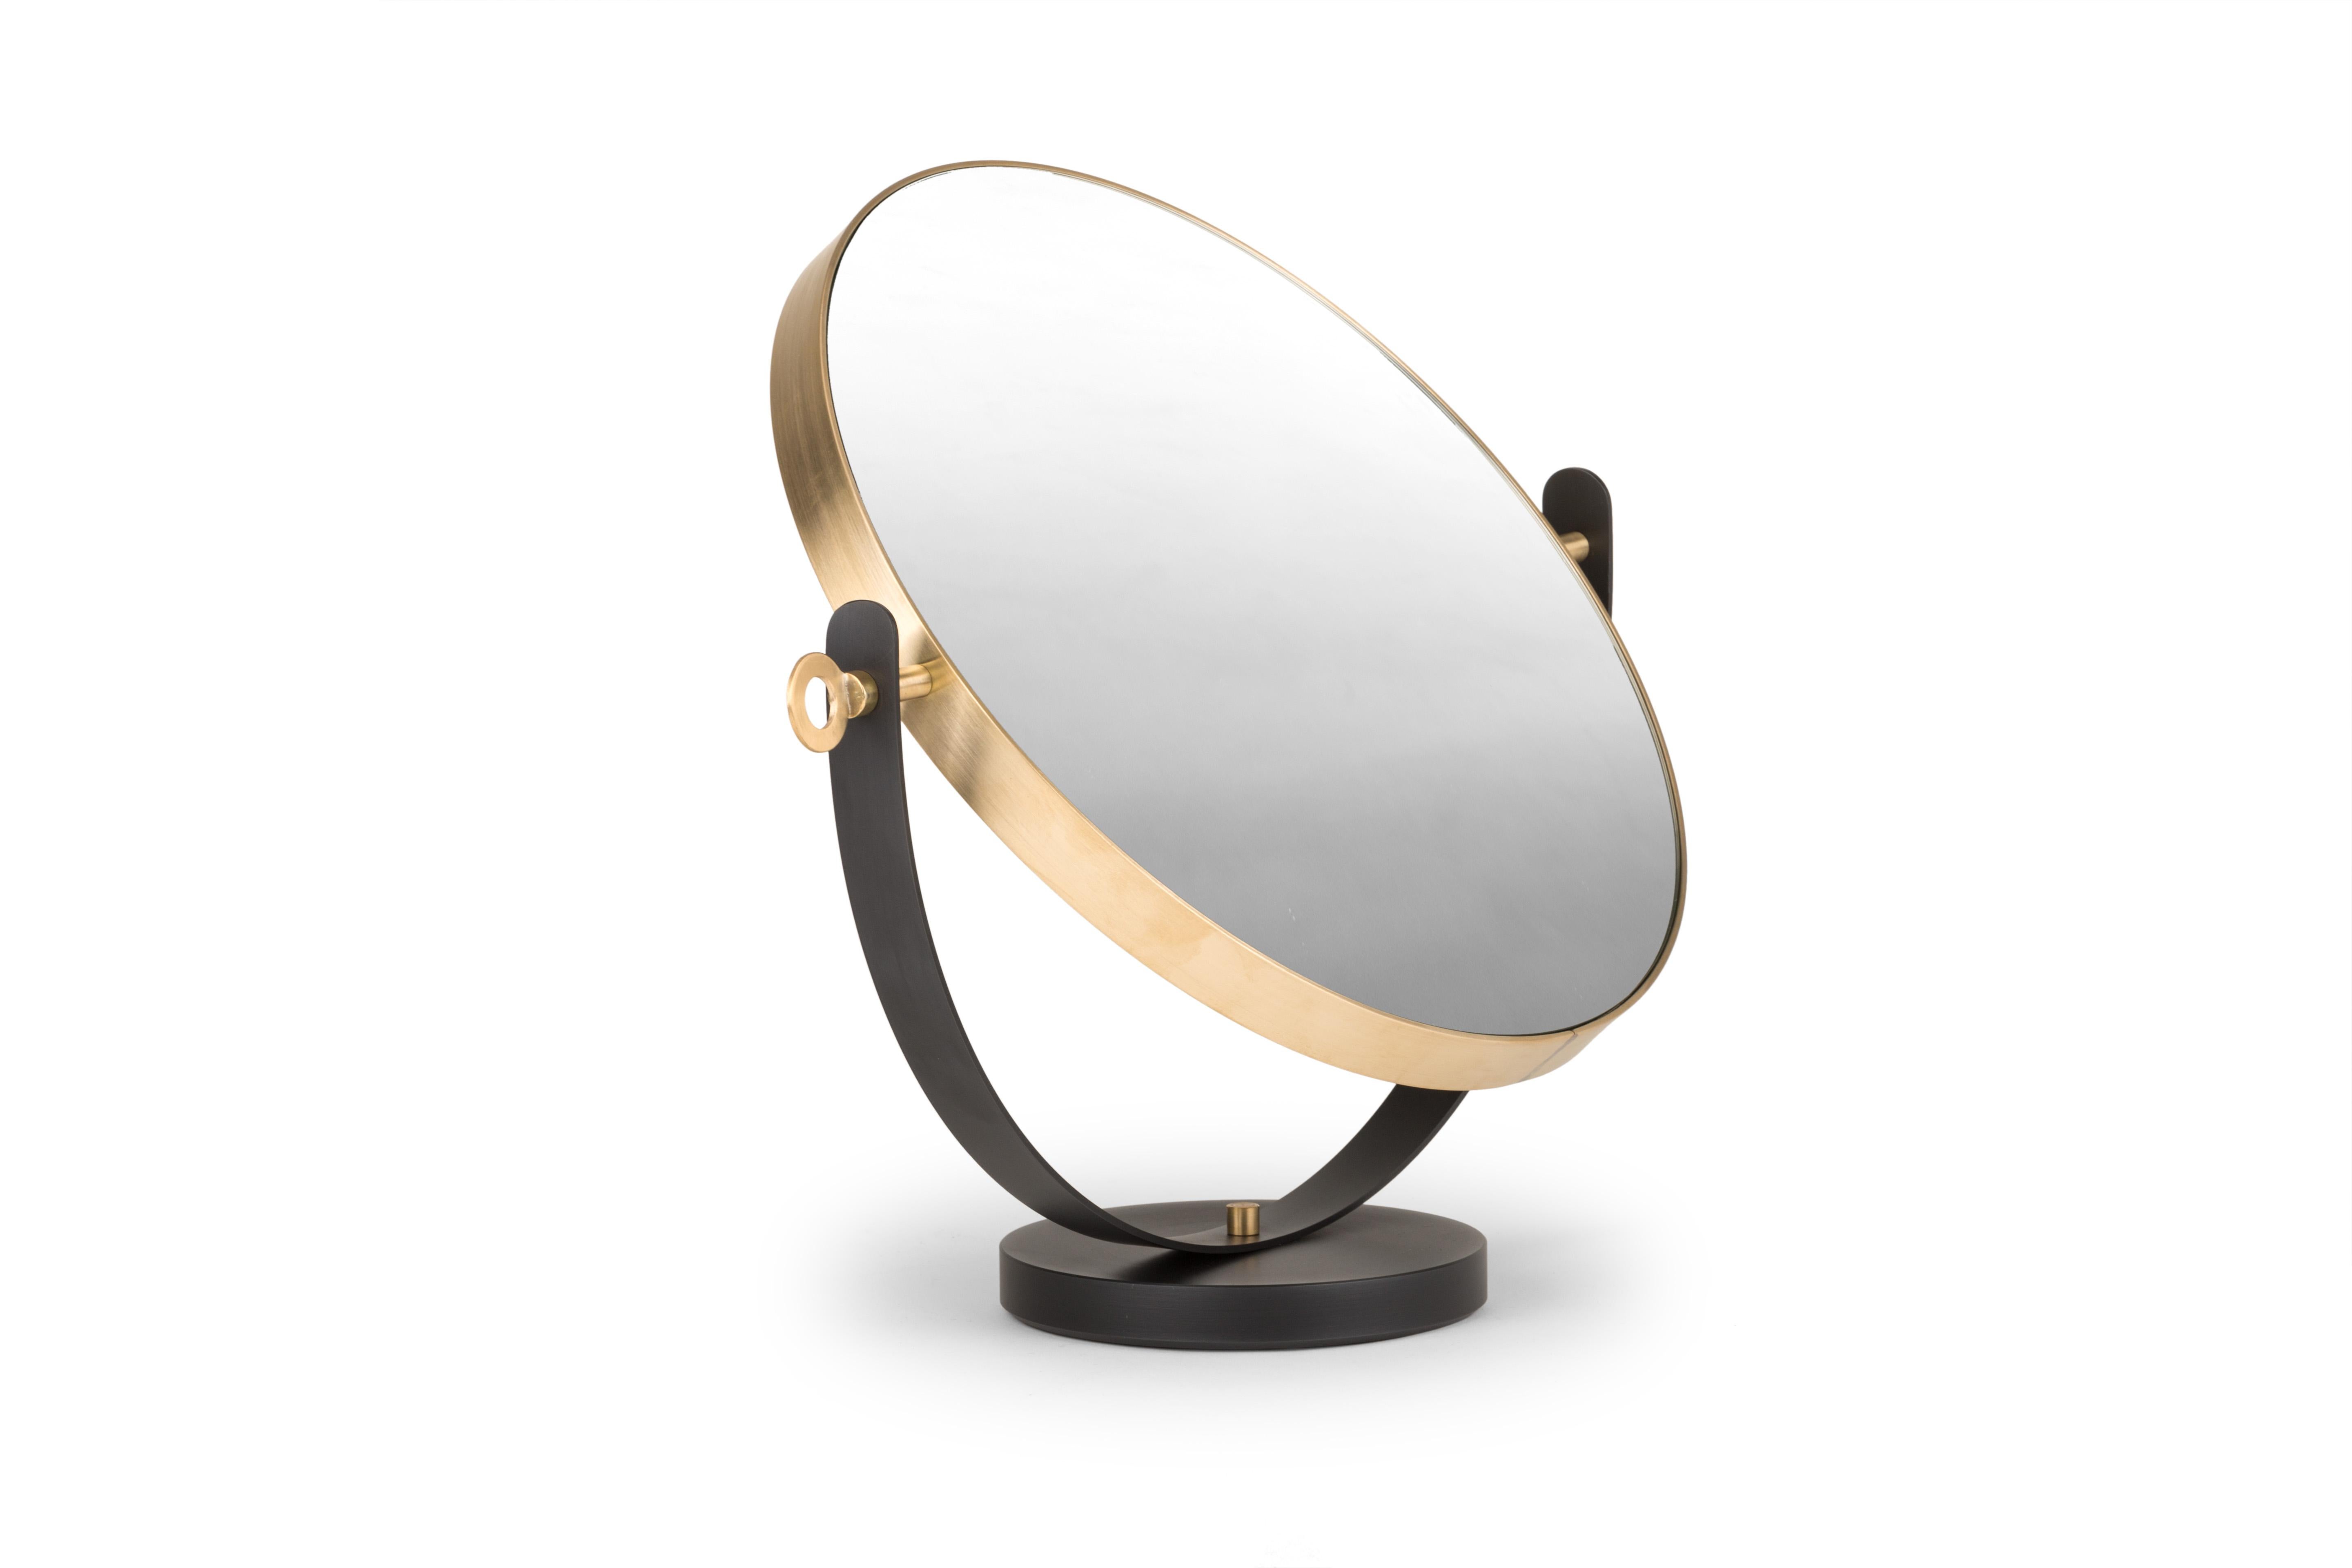 Ilario mirror by Mingardo
Dimensions: D 47 x W 18.5 x H 47 cm.
Materials: iron and natural brass, mirror.
Weight: 7 kg

Also available in different finishes. 

The name of the mirror describes its essence: Ilario was the founder of the